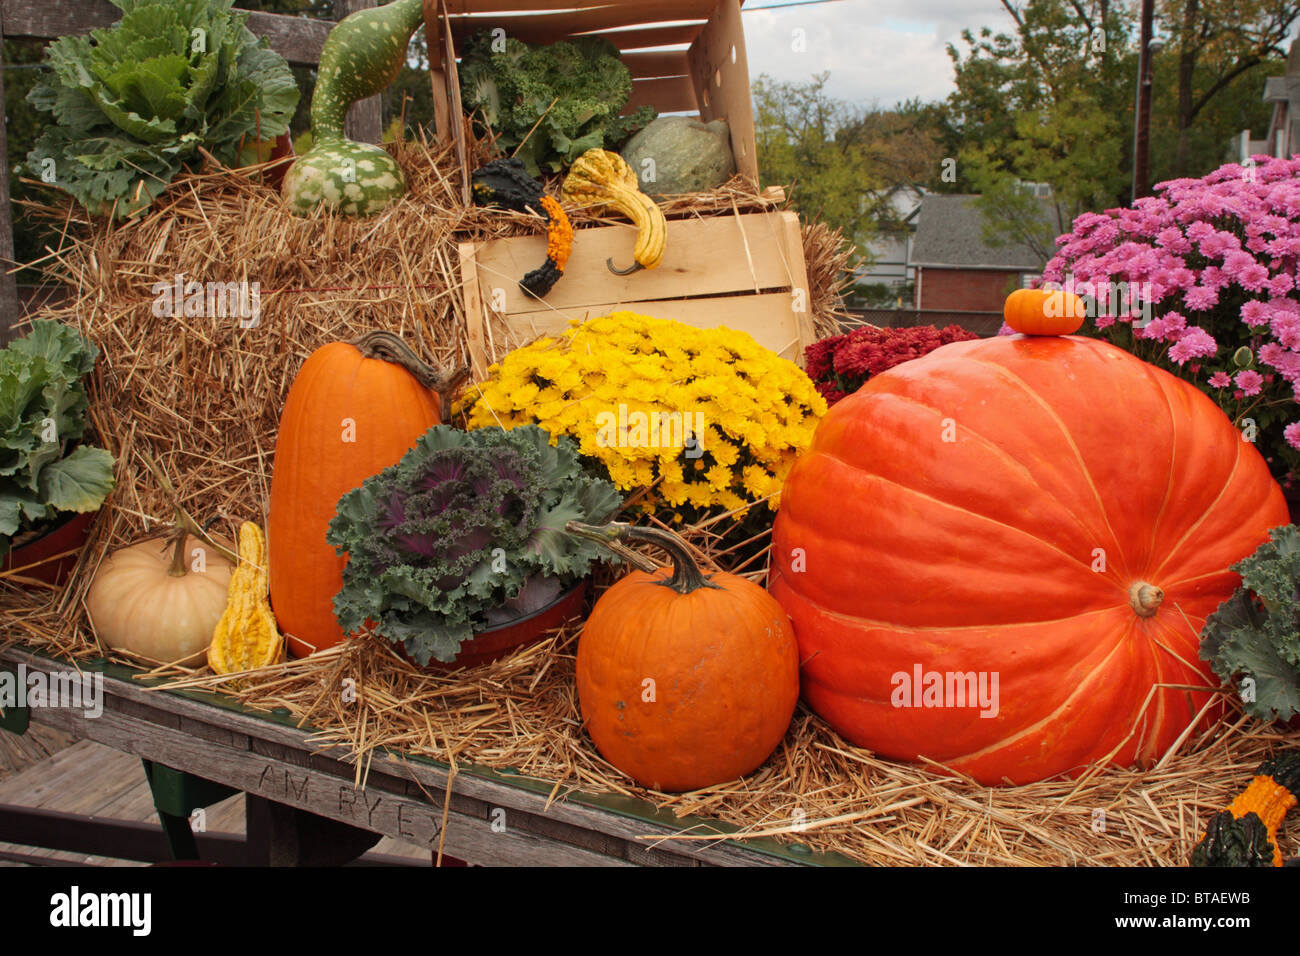 Pumpkin and Squashes displayed on a farm cart Stock Photo